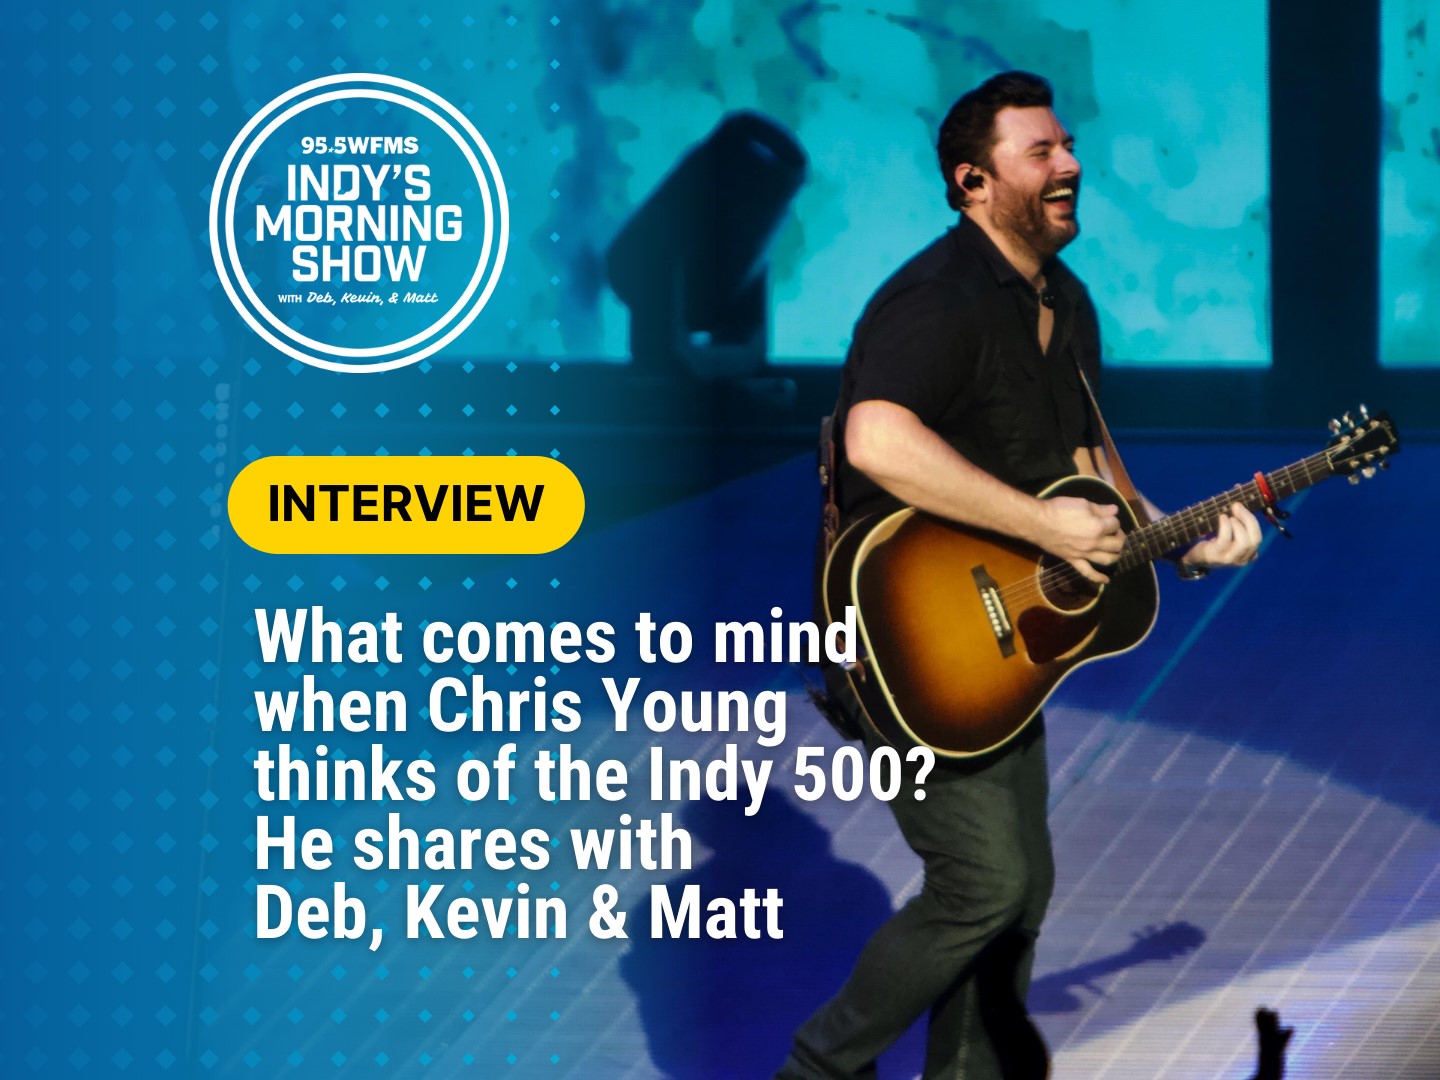 Chris Young Hangs With Indy’s Morning Show …